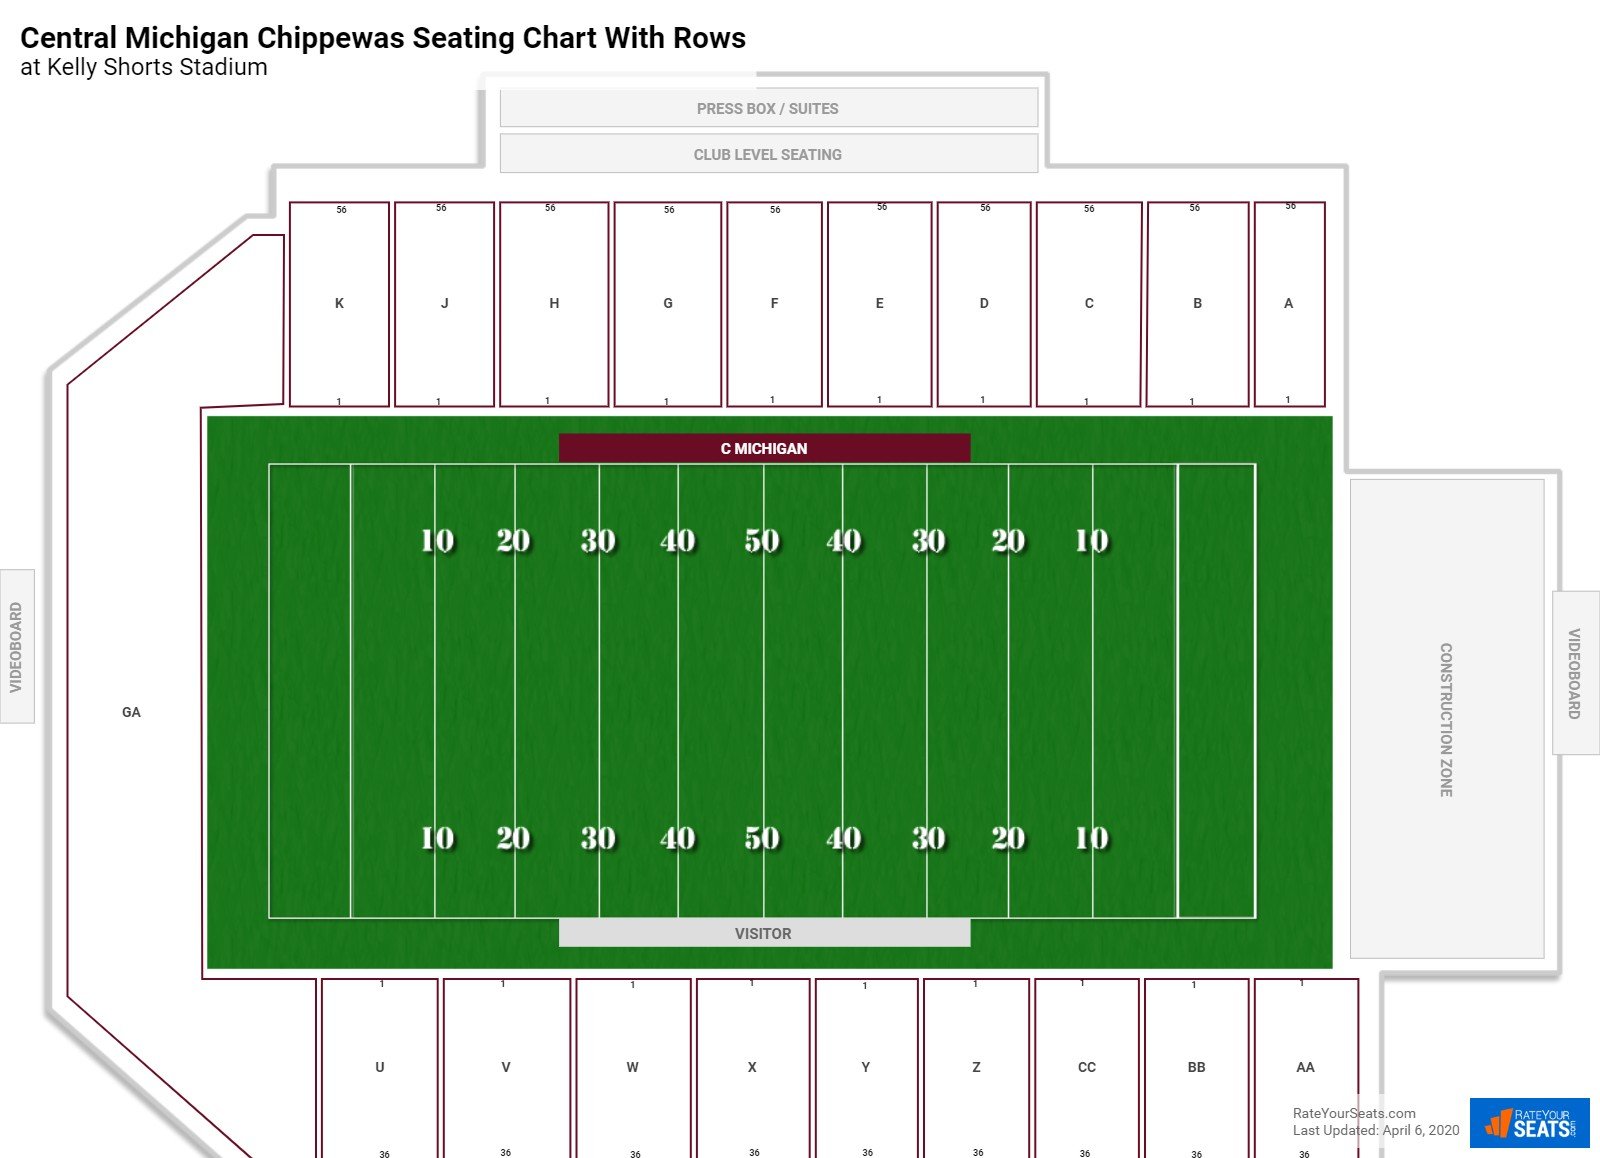 Kelly Shorts Stadium seating chart with row numbers